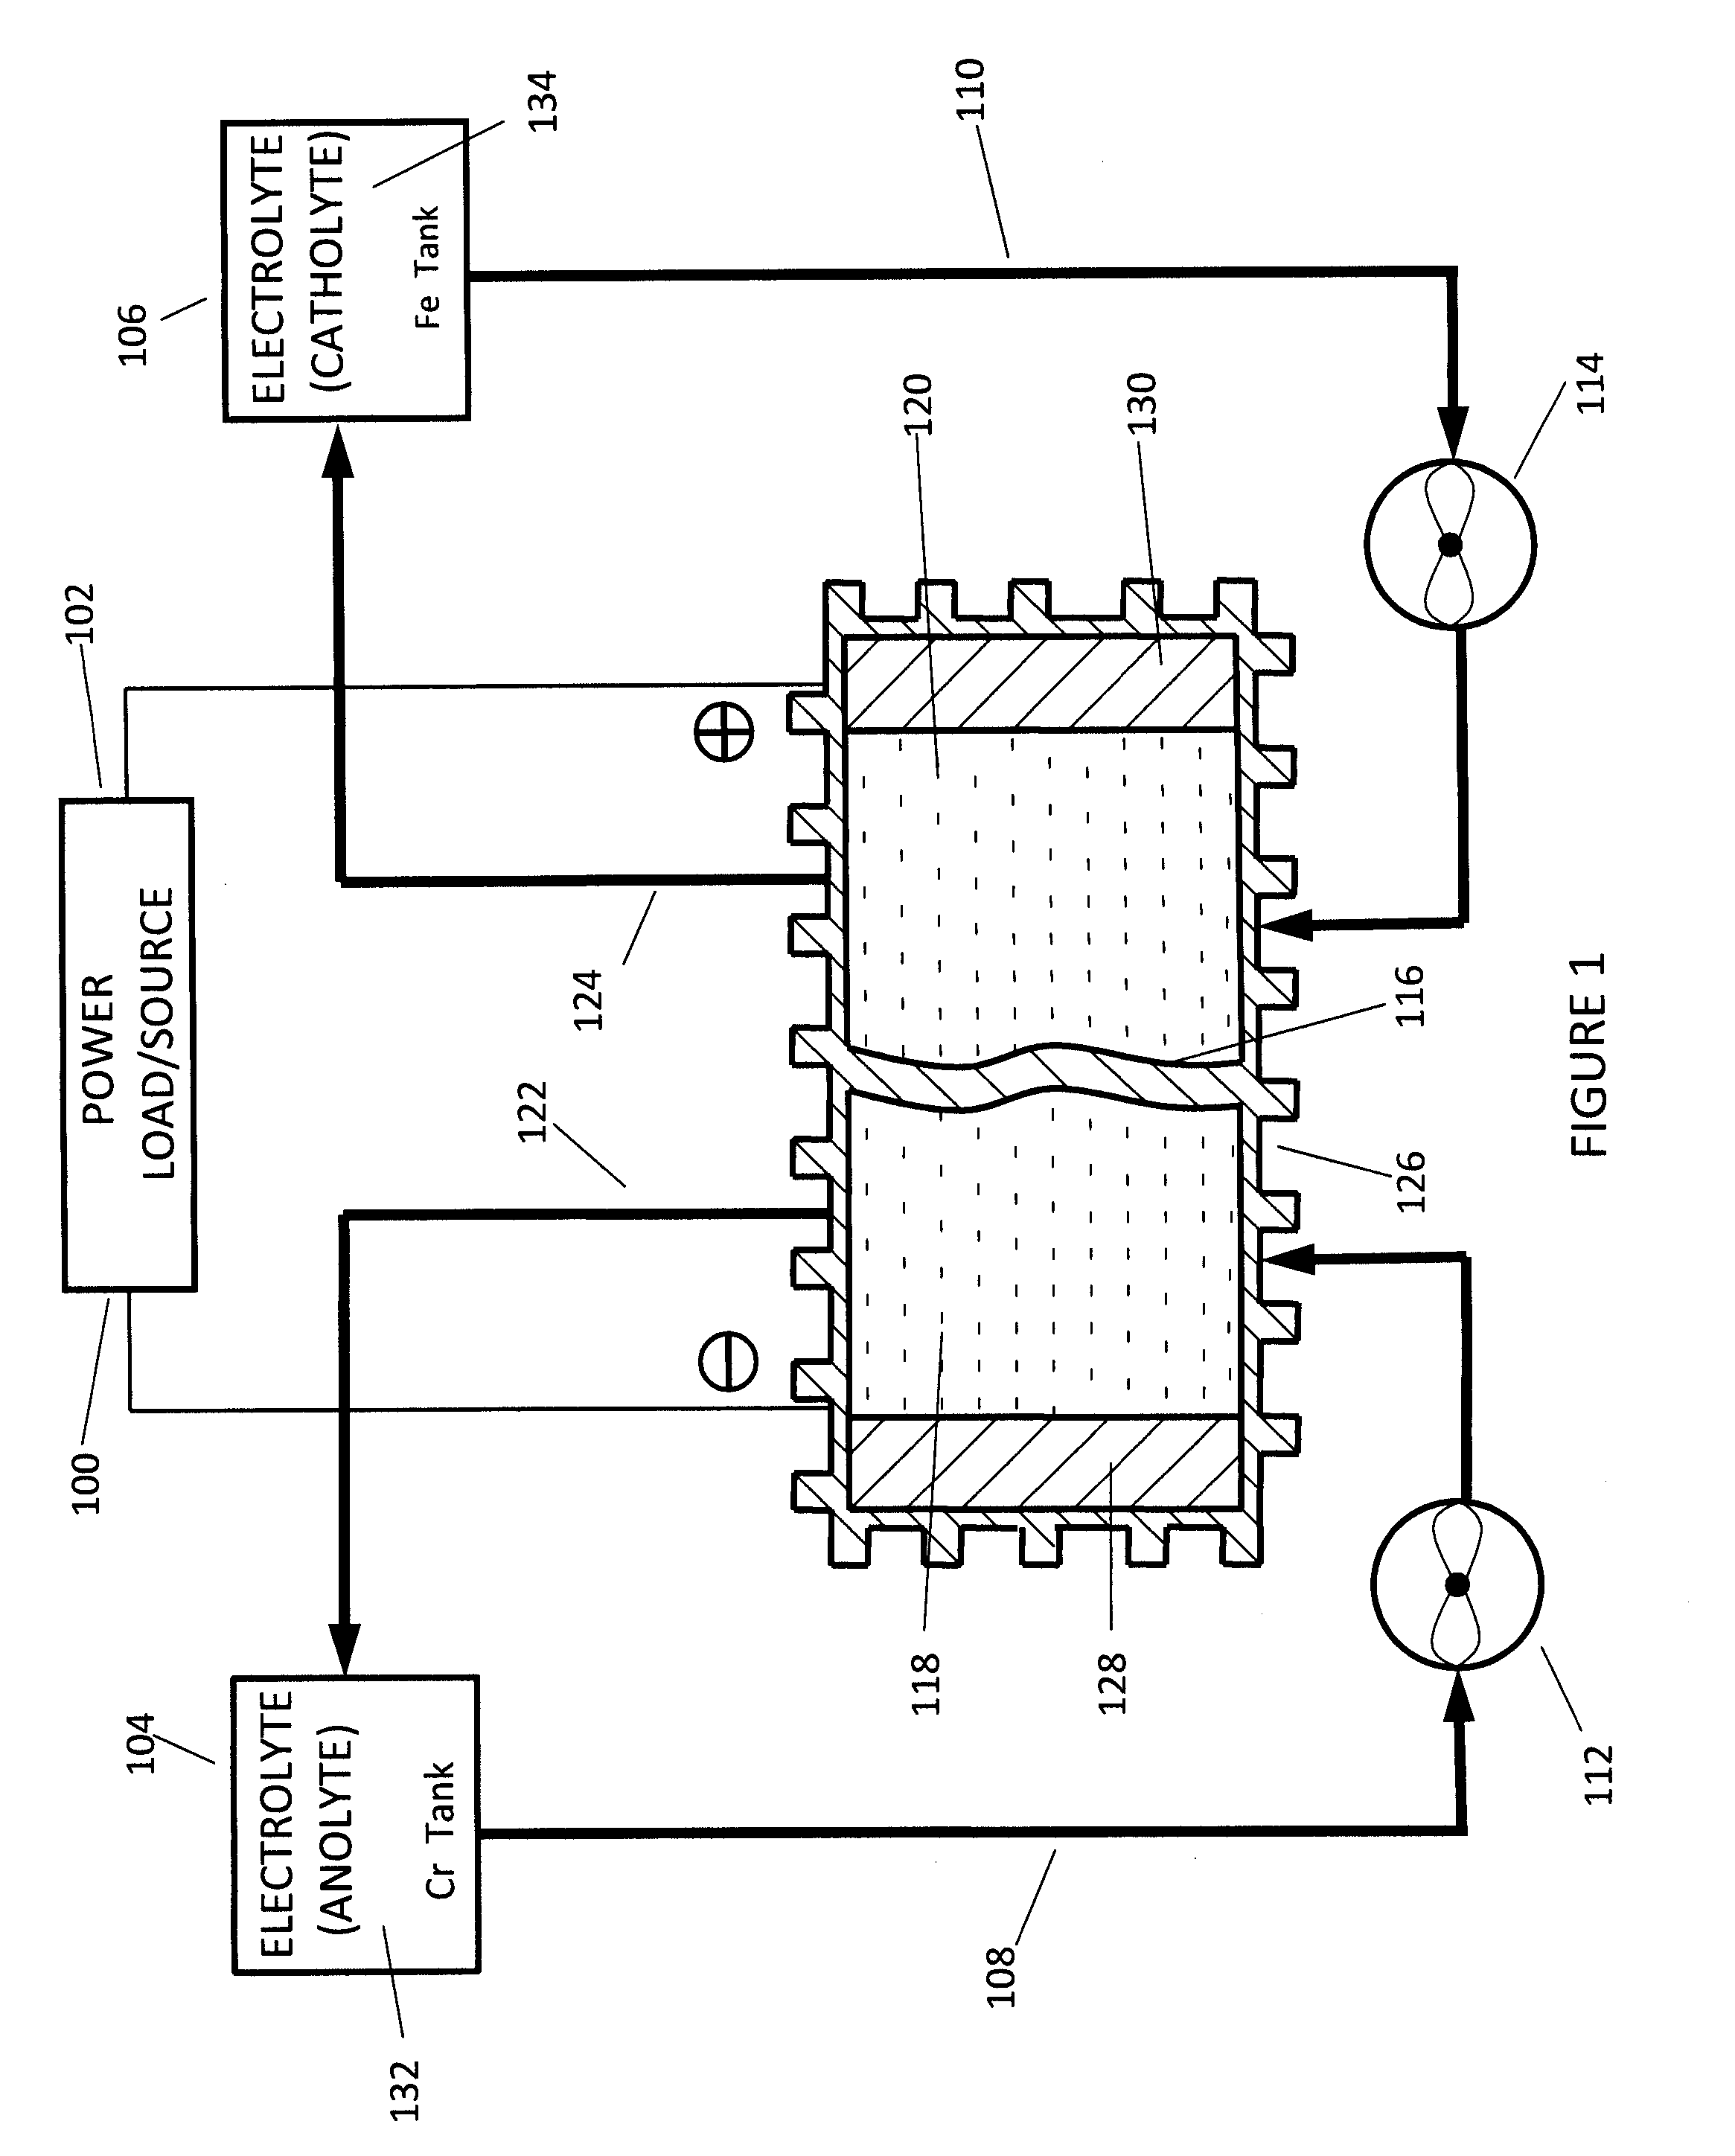 Venturi pumping system in a hydrogen gas circulation of a flow battery